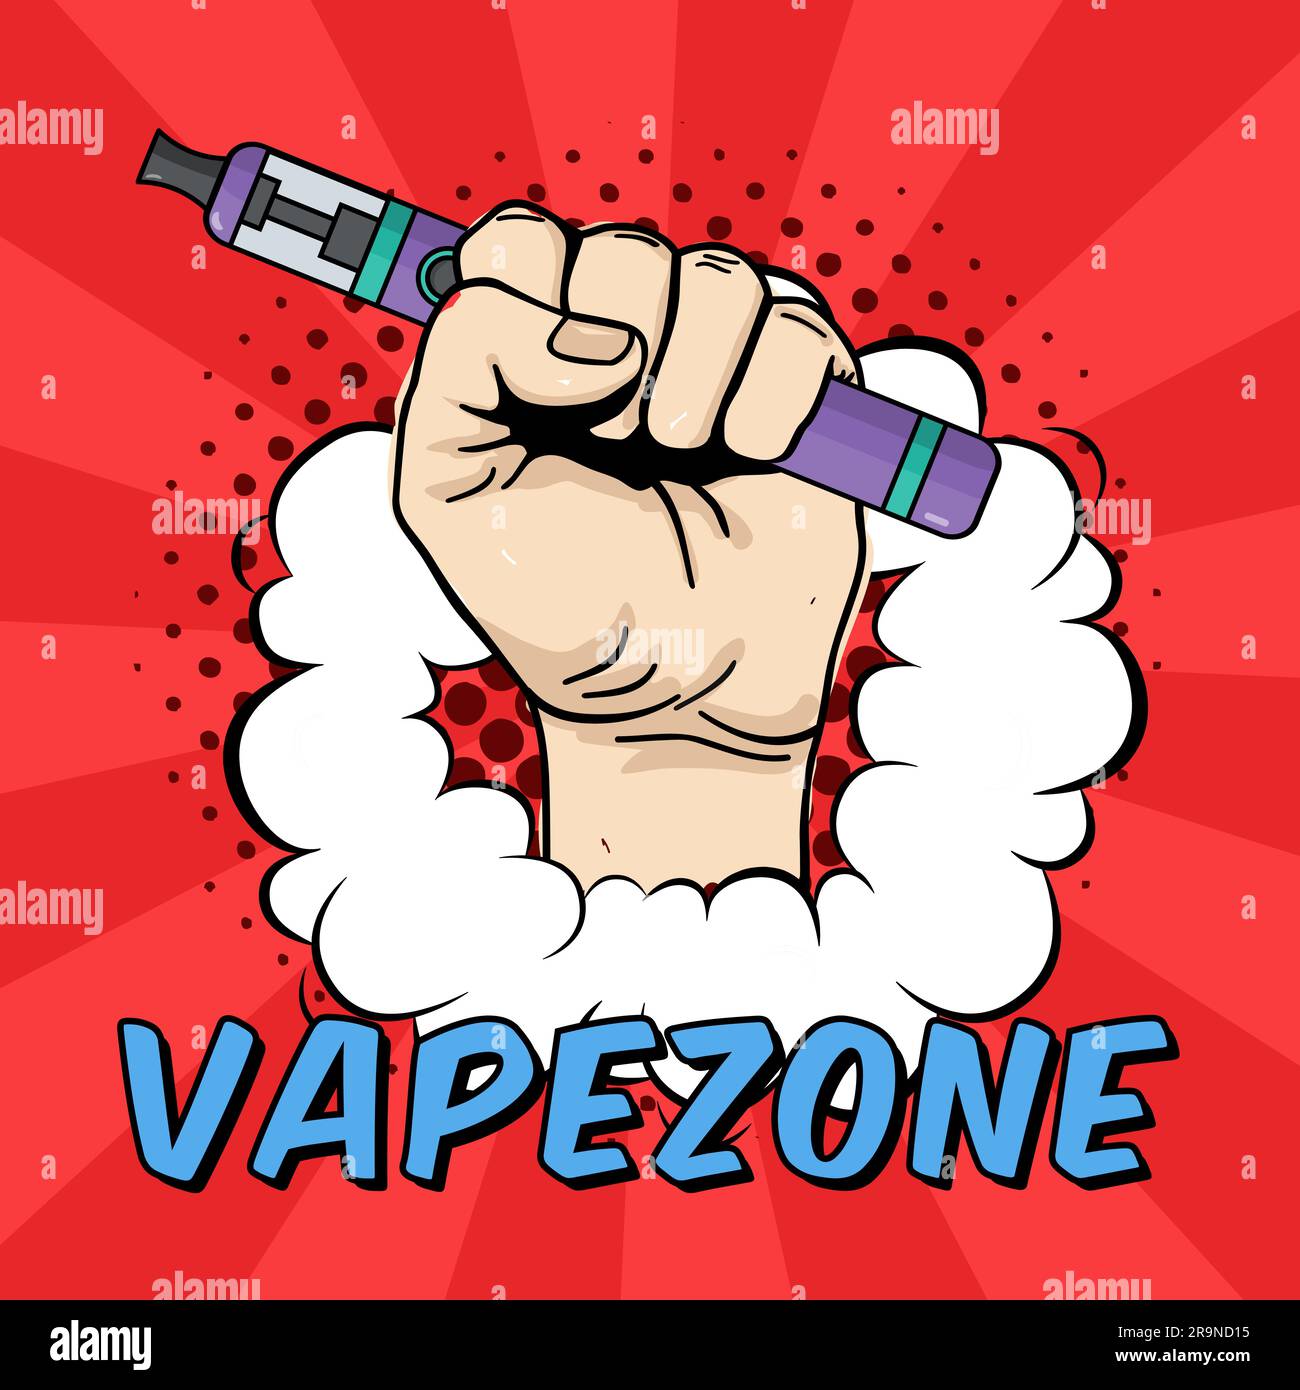 Vector vape zone illustration with hand holding electric tool for vaping. Vapor, electric cigarette, vaporizer e-cig icon. Comics cartoon style. Stock Vector